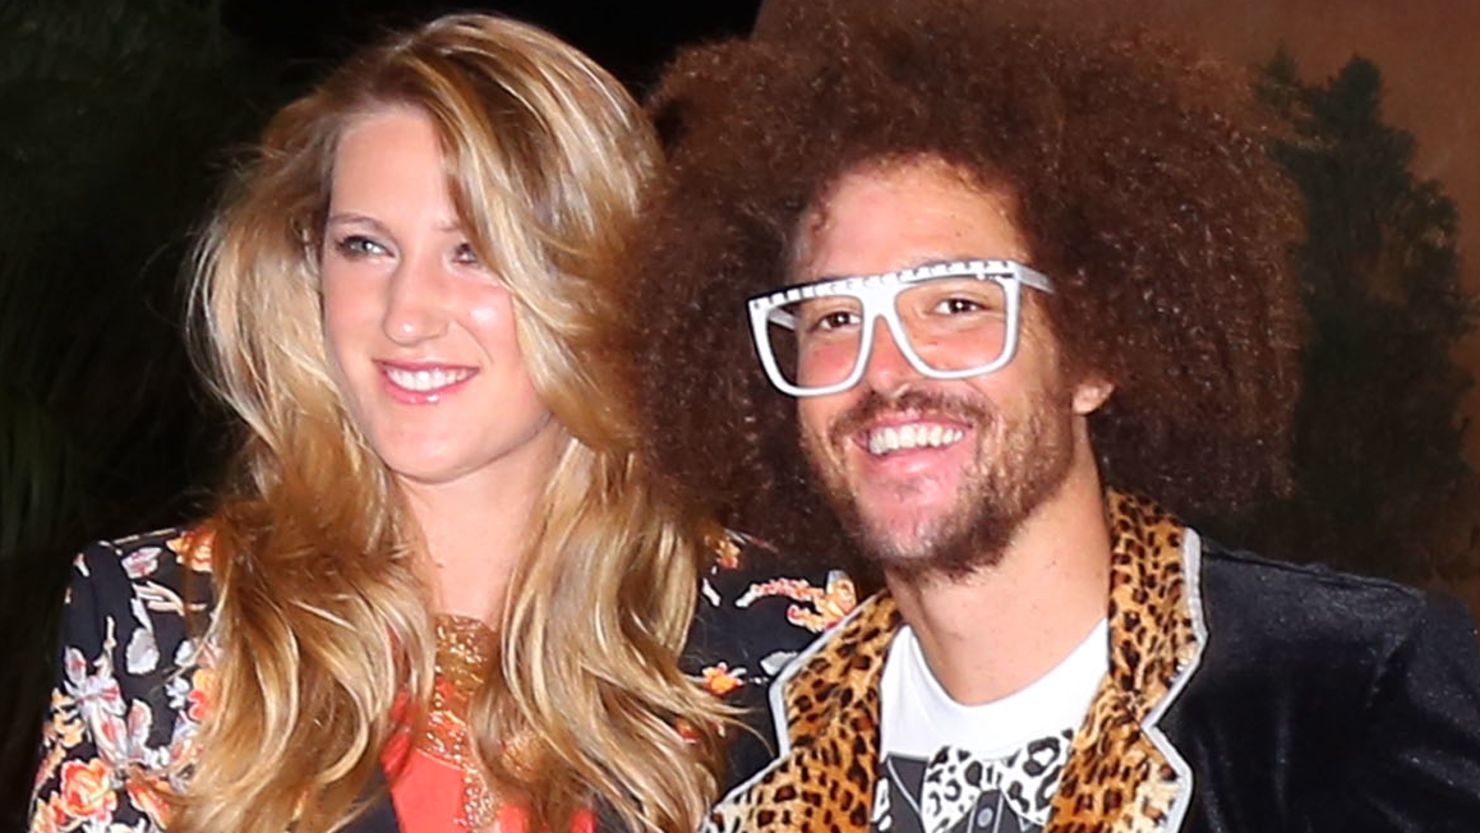  Victoria Azarenka and LMFAO singer Redfoo at a players' party at the IW Club on  in Indian Wells, California on March 7.